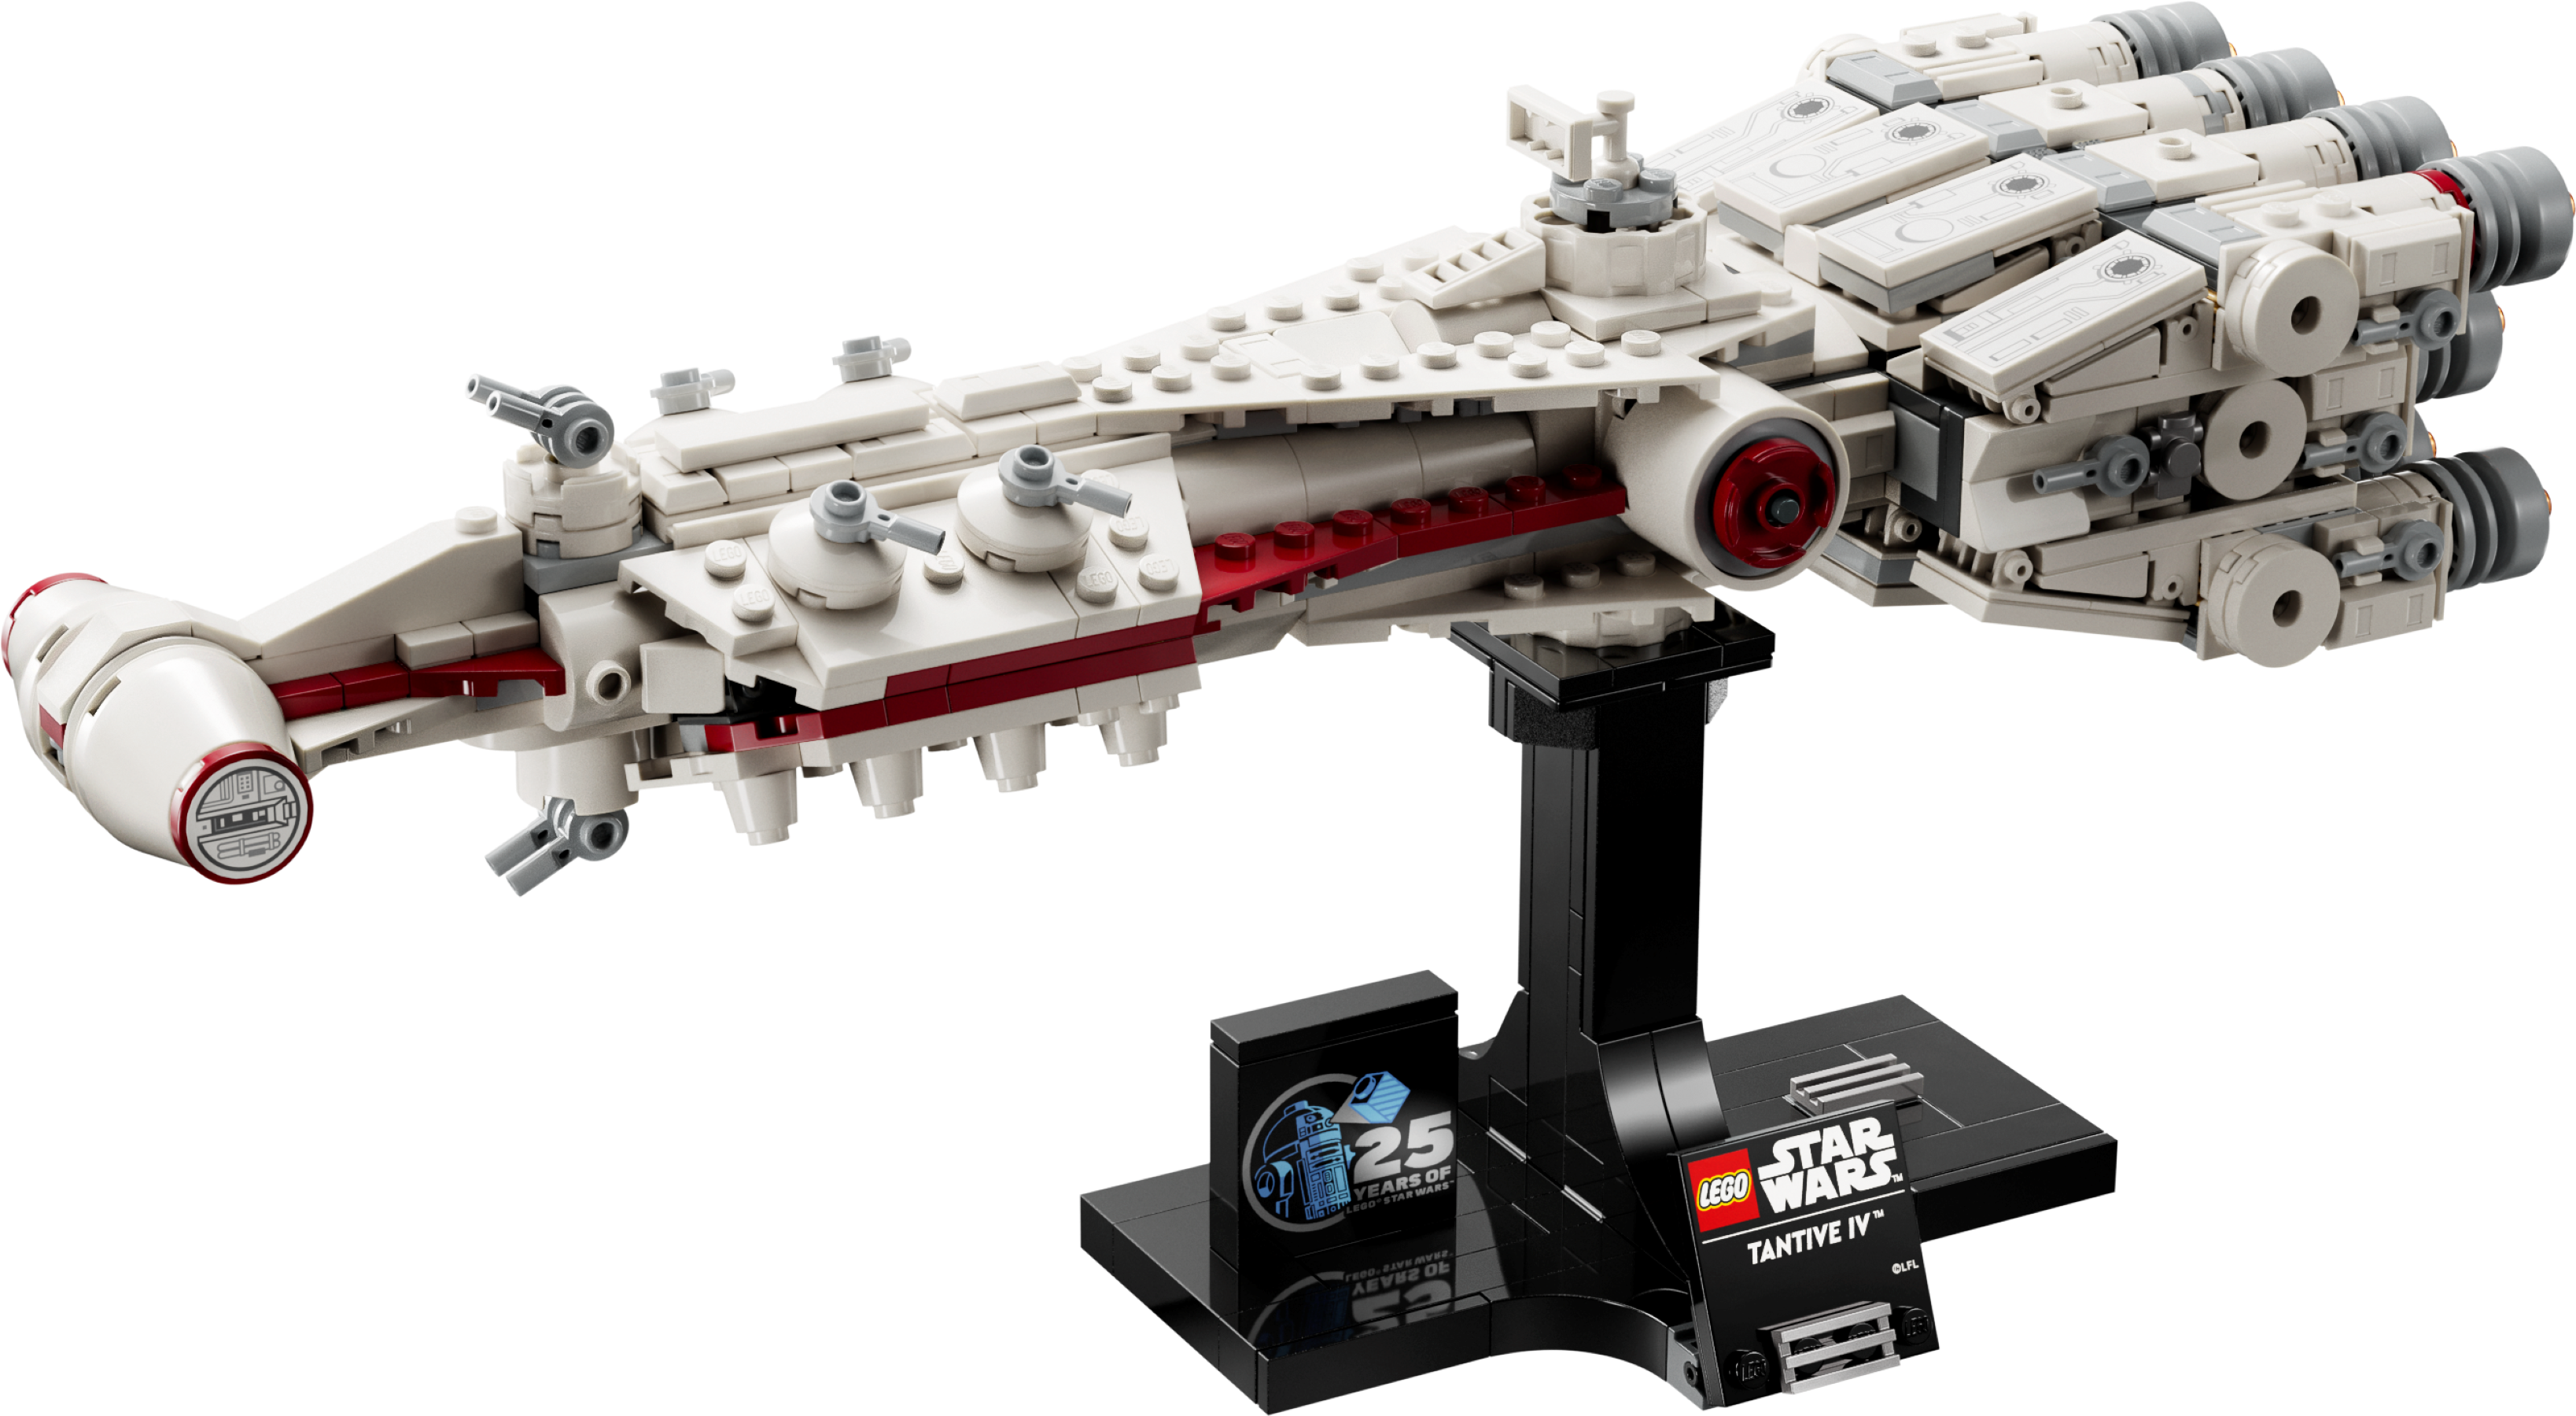 LEGO® Star Wars™ – AG LEGO® Certified Stores